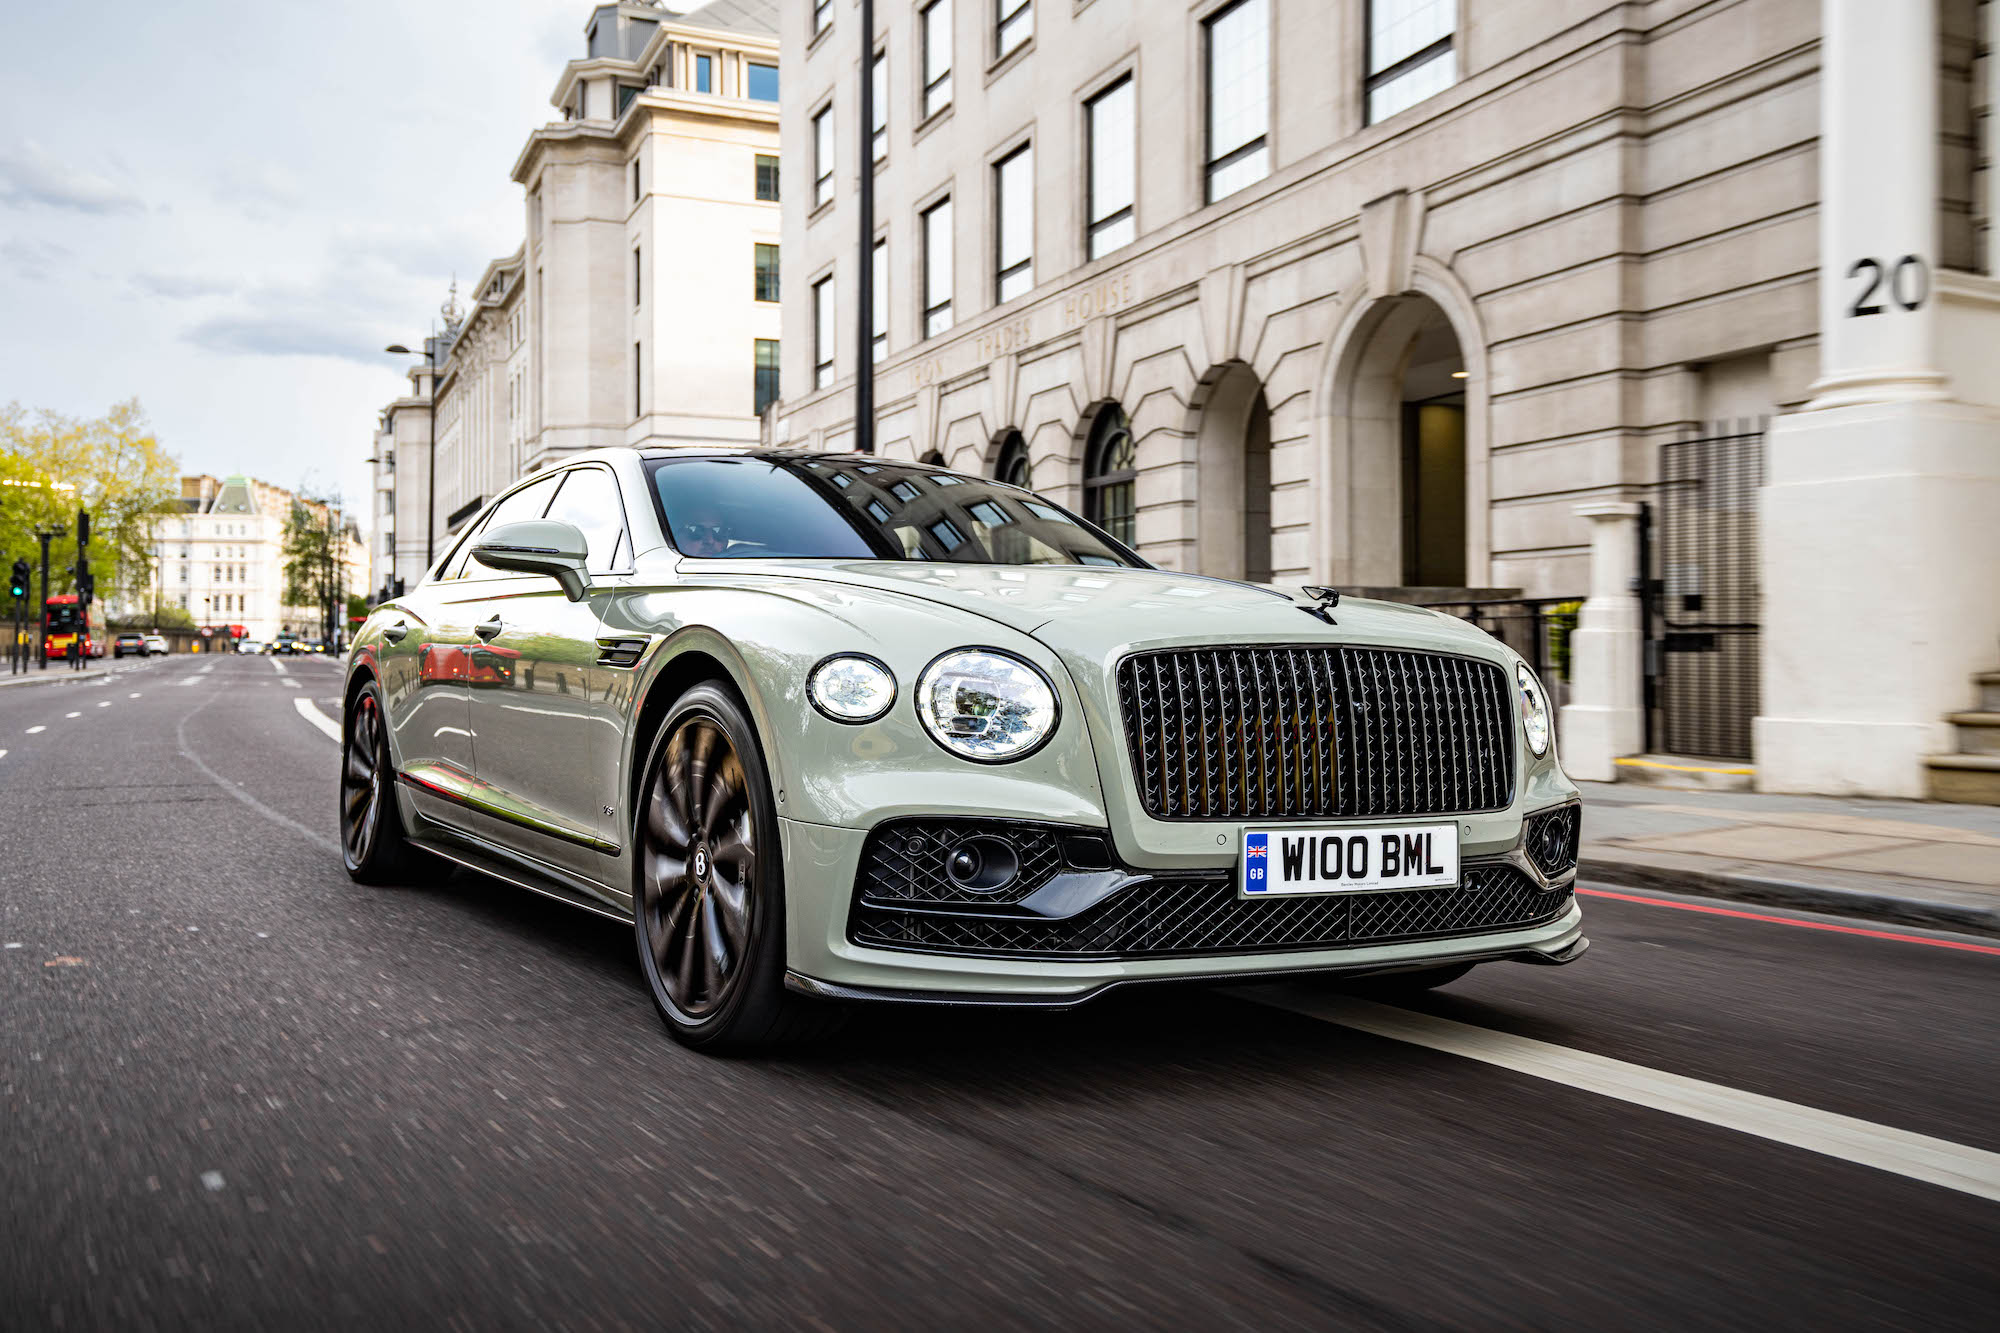 Bentley Flying Spur, London. The Review